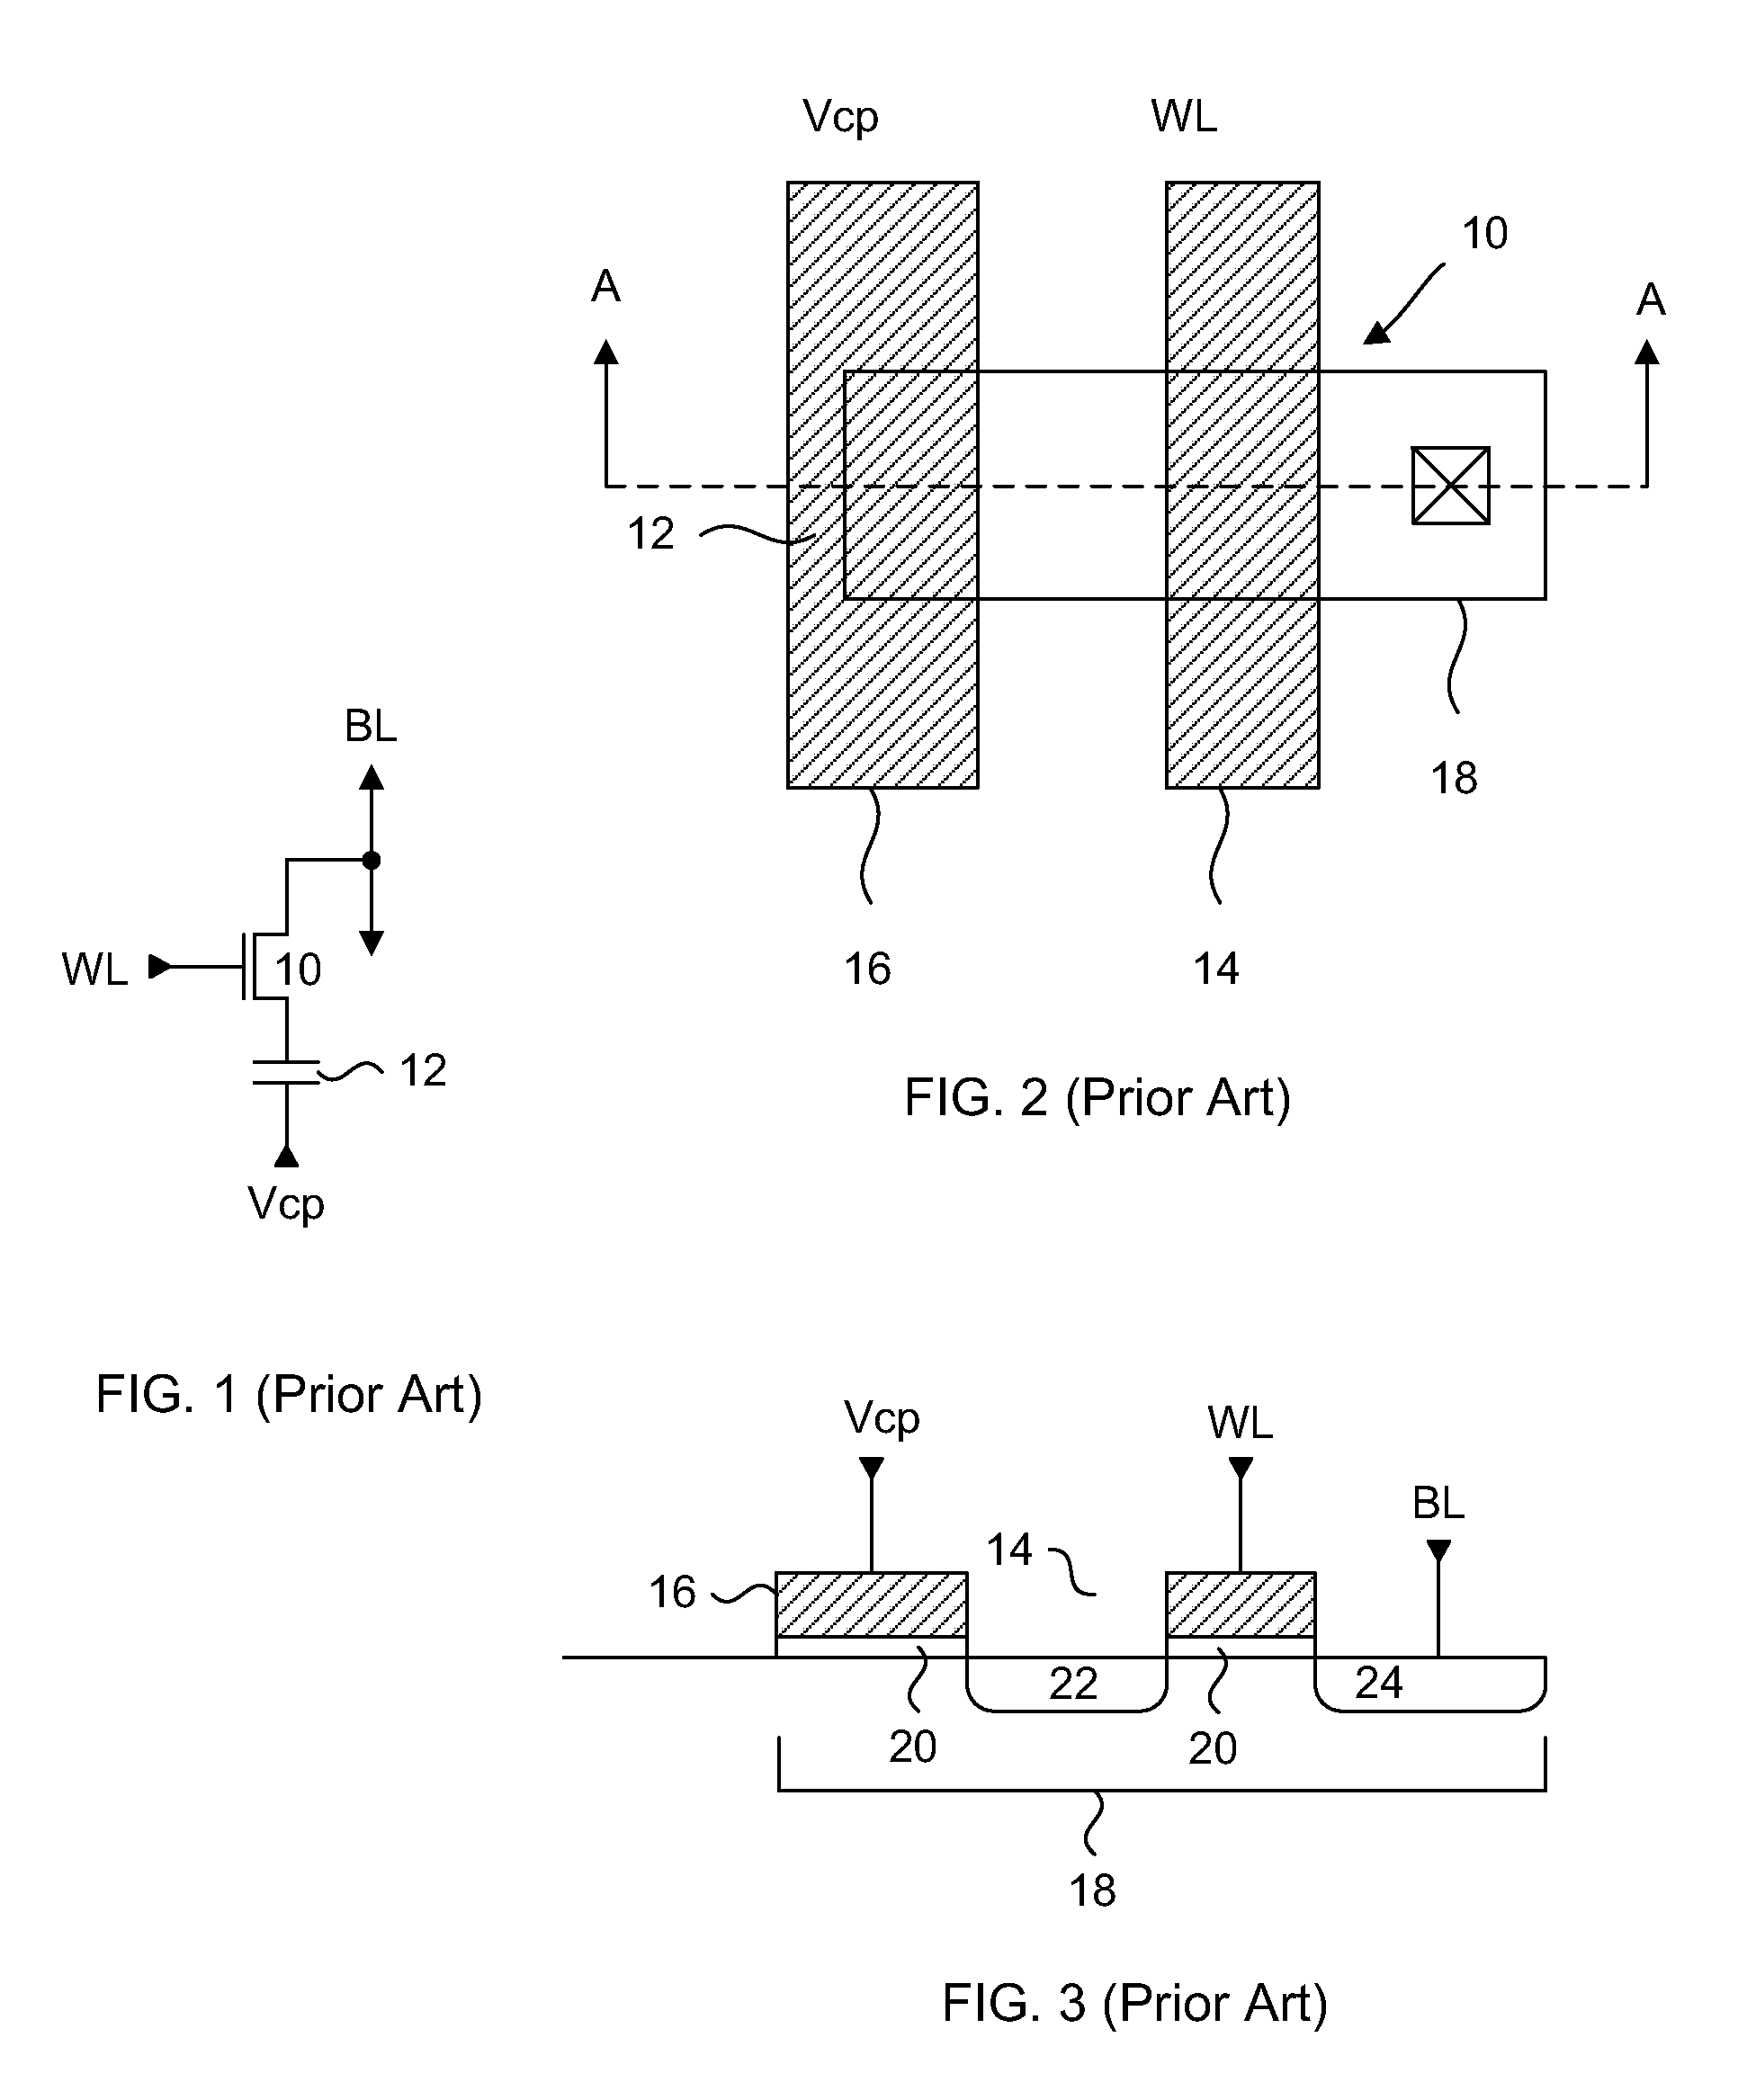 Low power antifuse sensing scheme with improved reliability